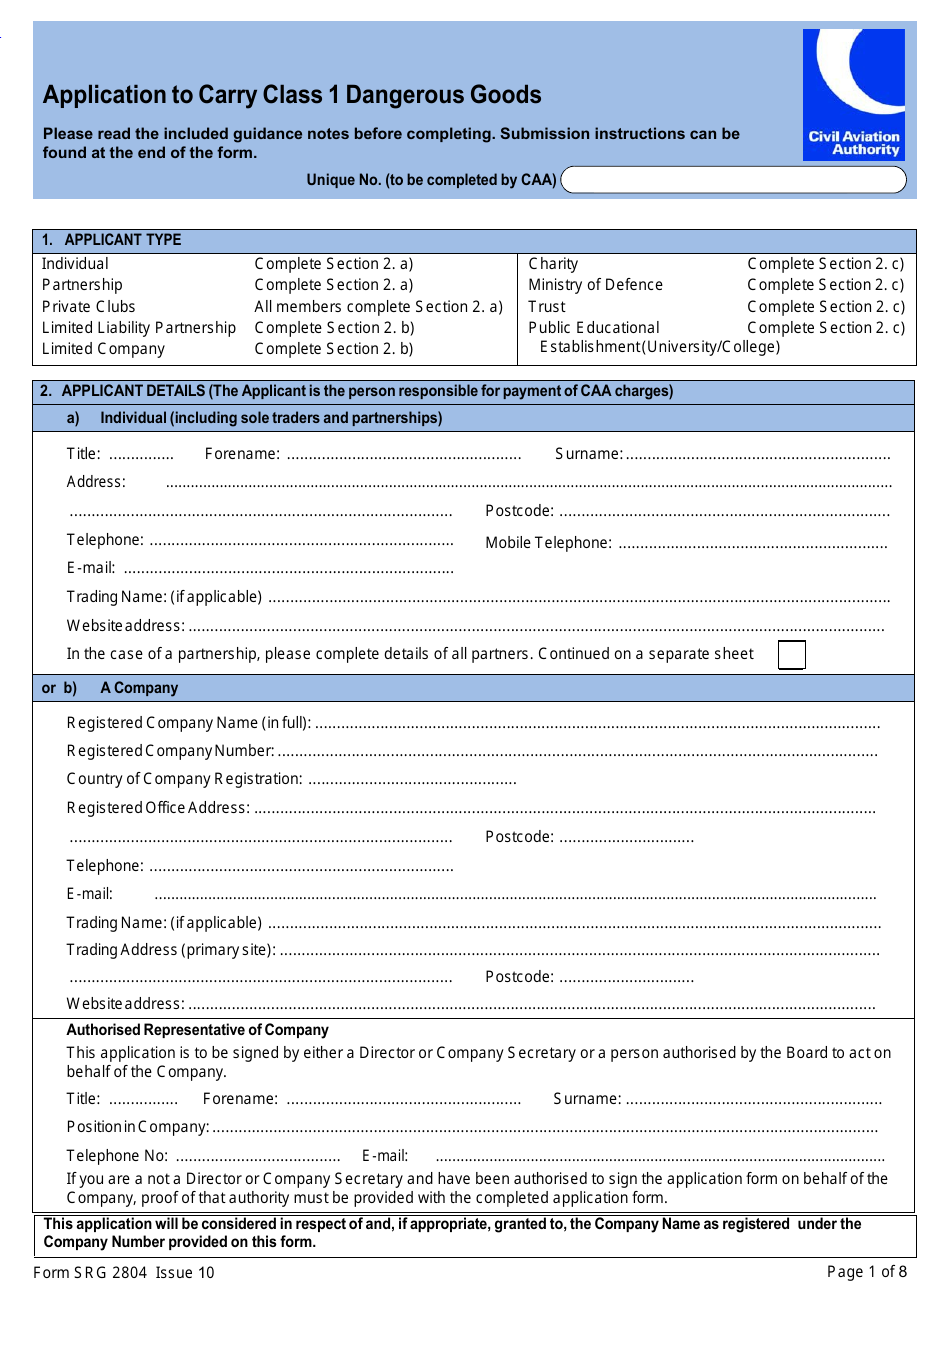 Form SRG2804 Application to Carry Class 1 Dangerous Goods - United Kingdom, Page 1